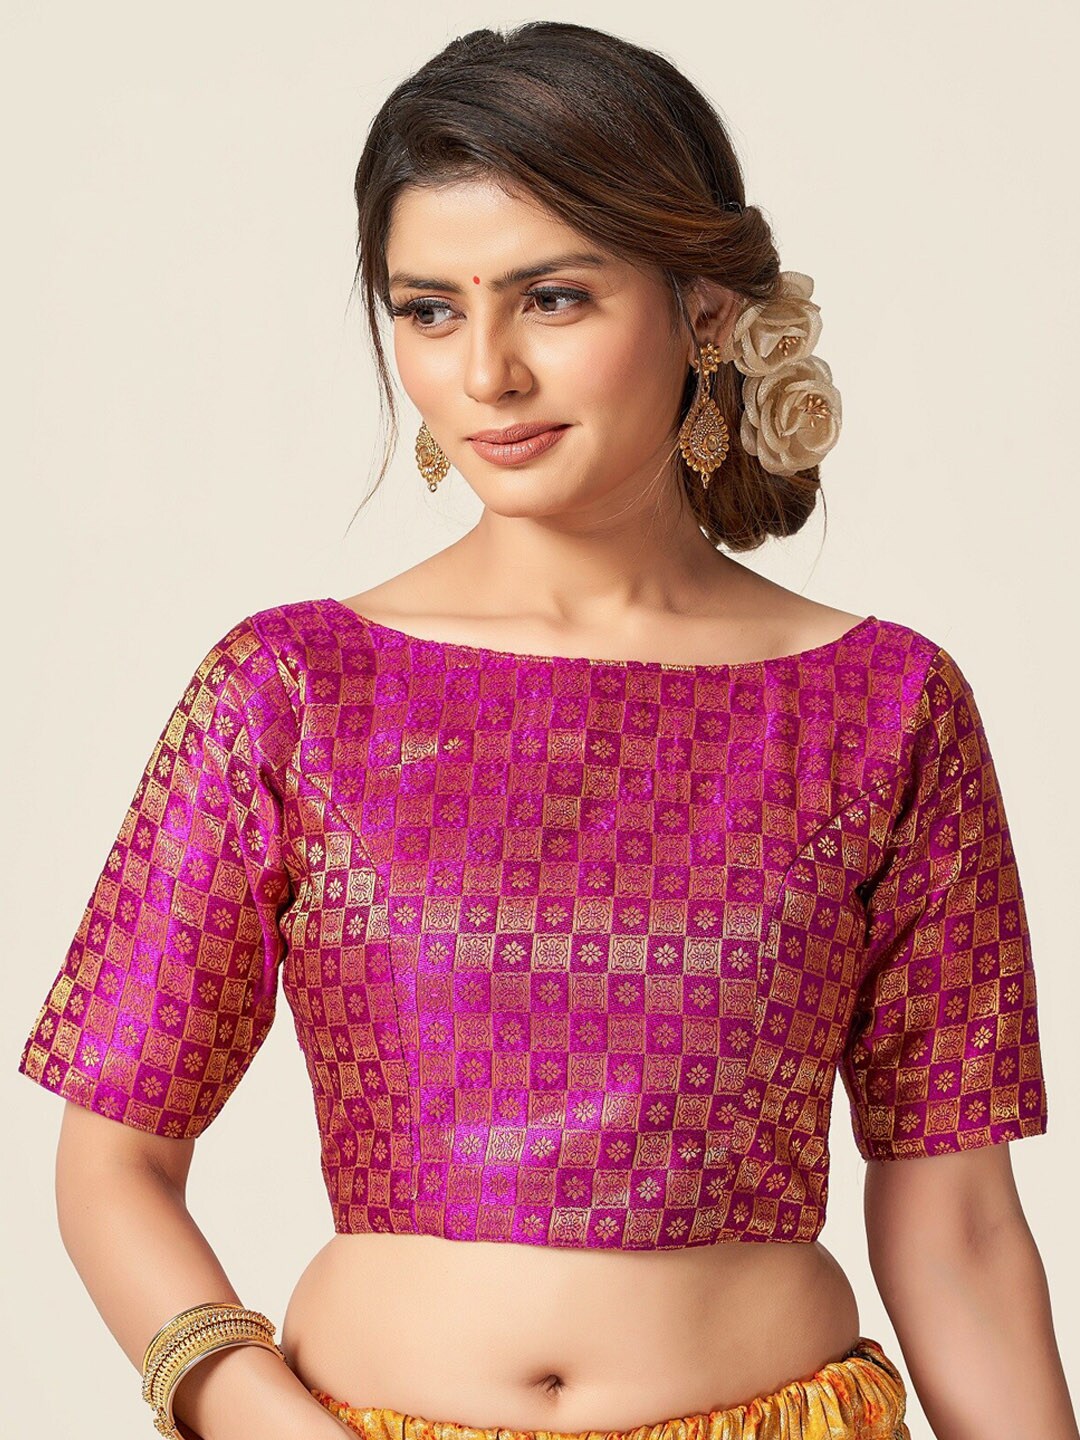 HIMRISE Women Pink Woven Design Saree Blouse Price in India